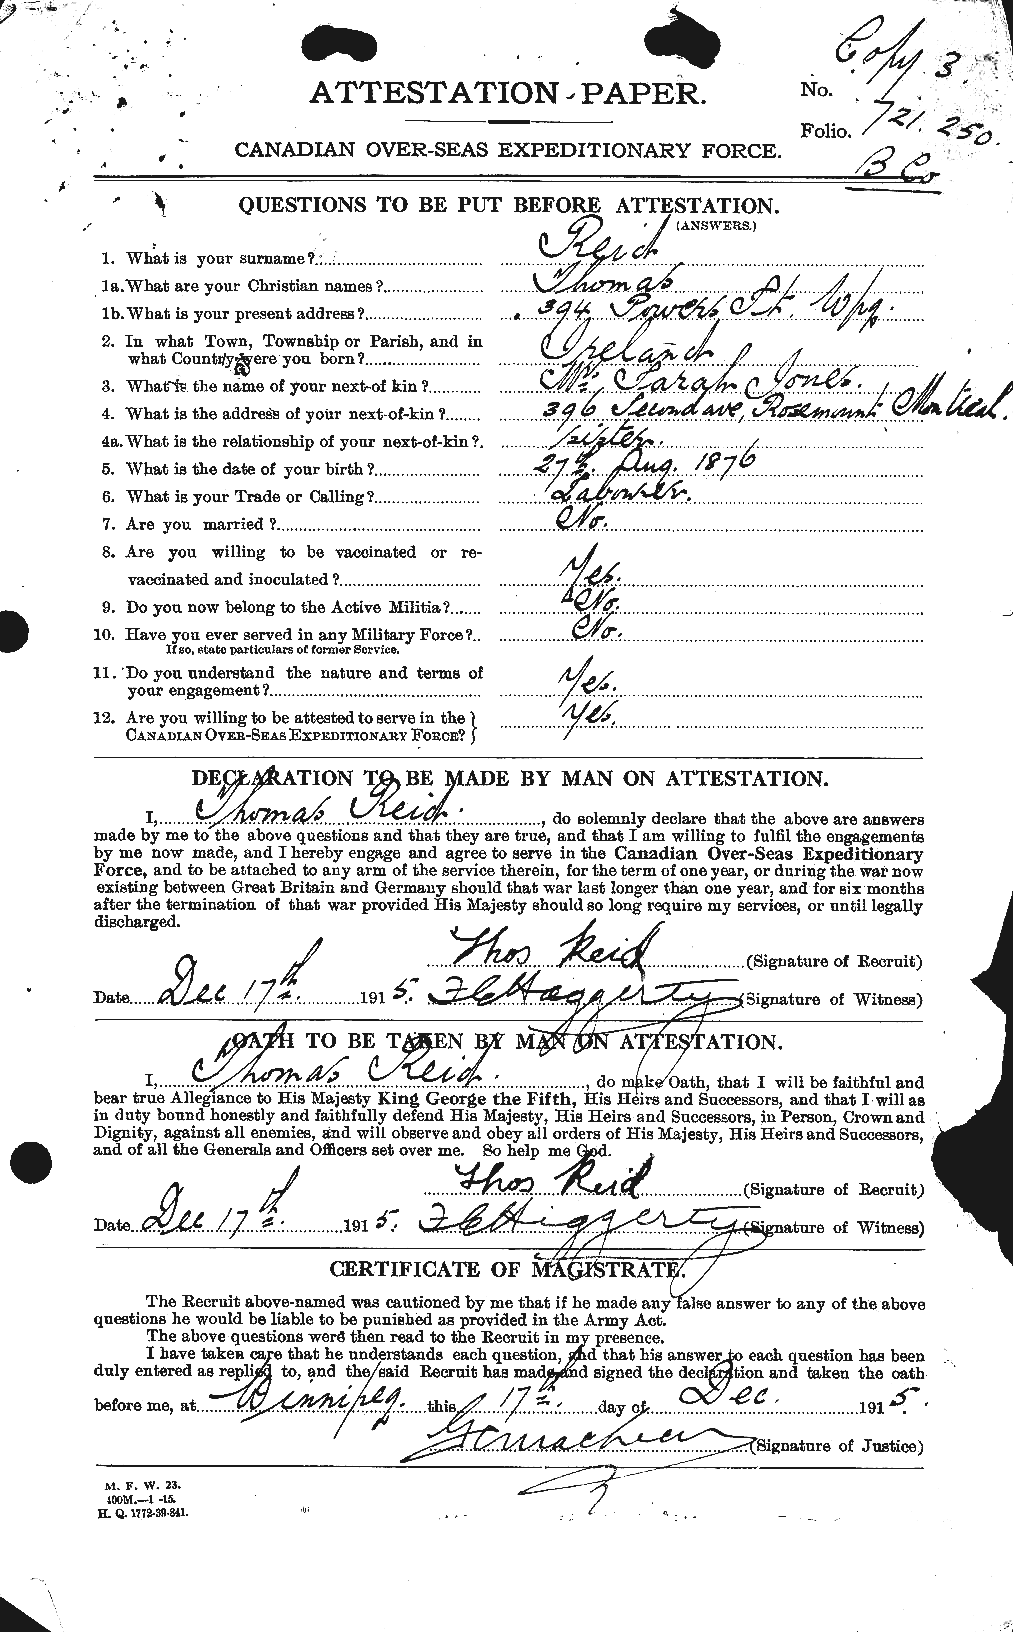 Personnel Records of the First World War - CEF 601978a